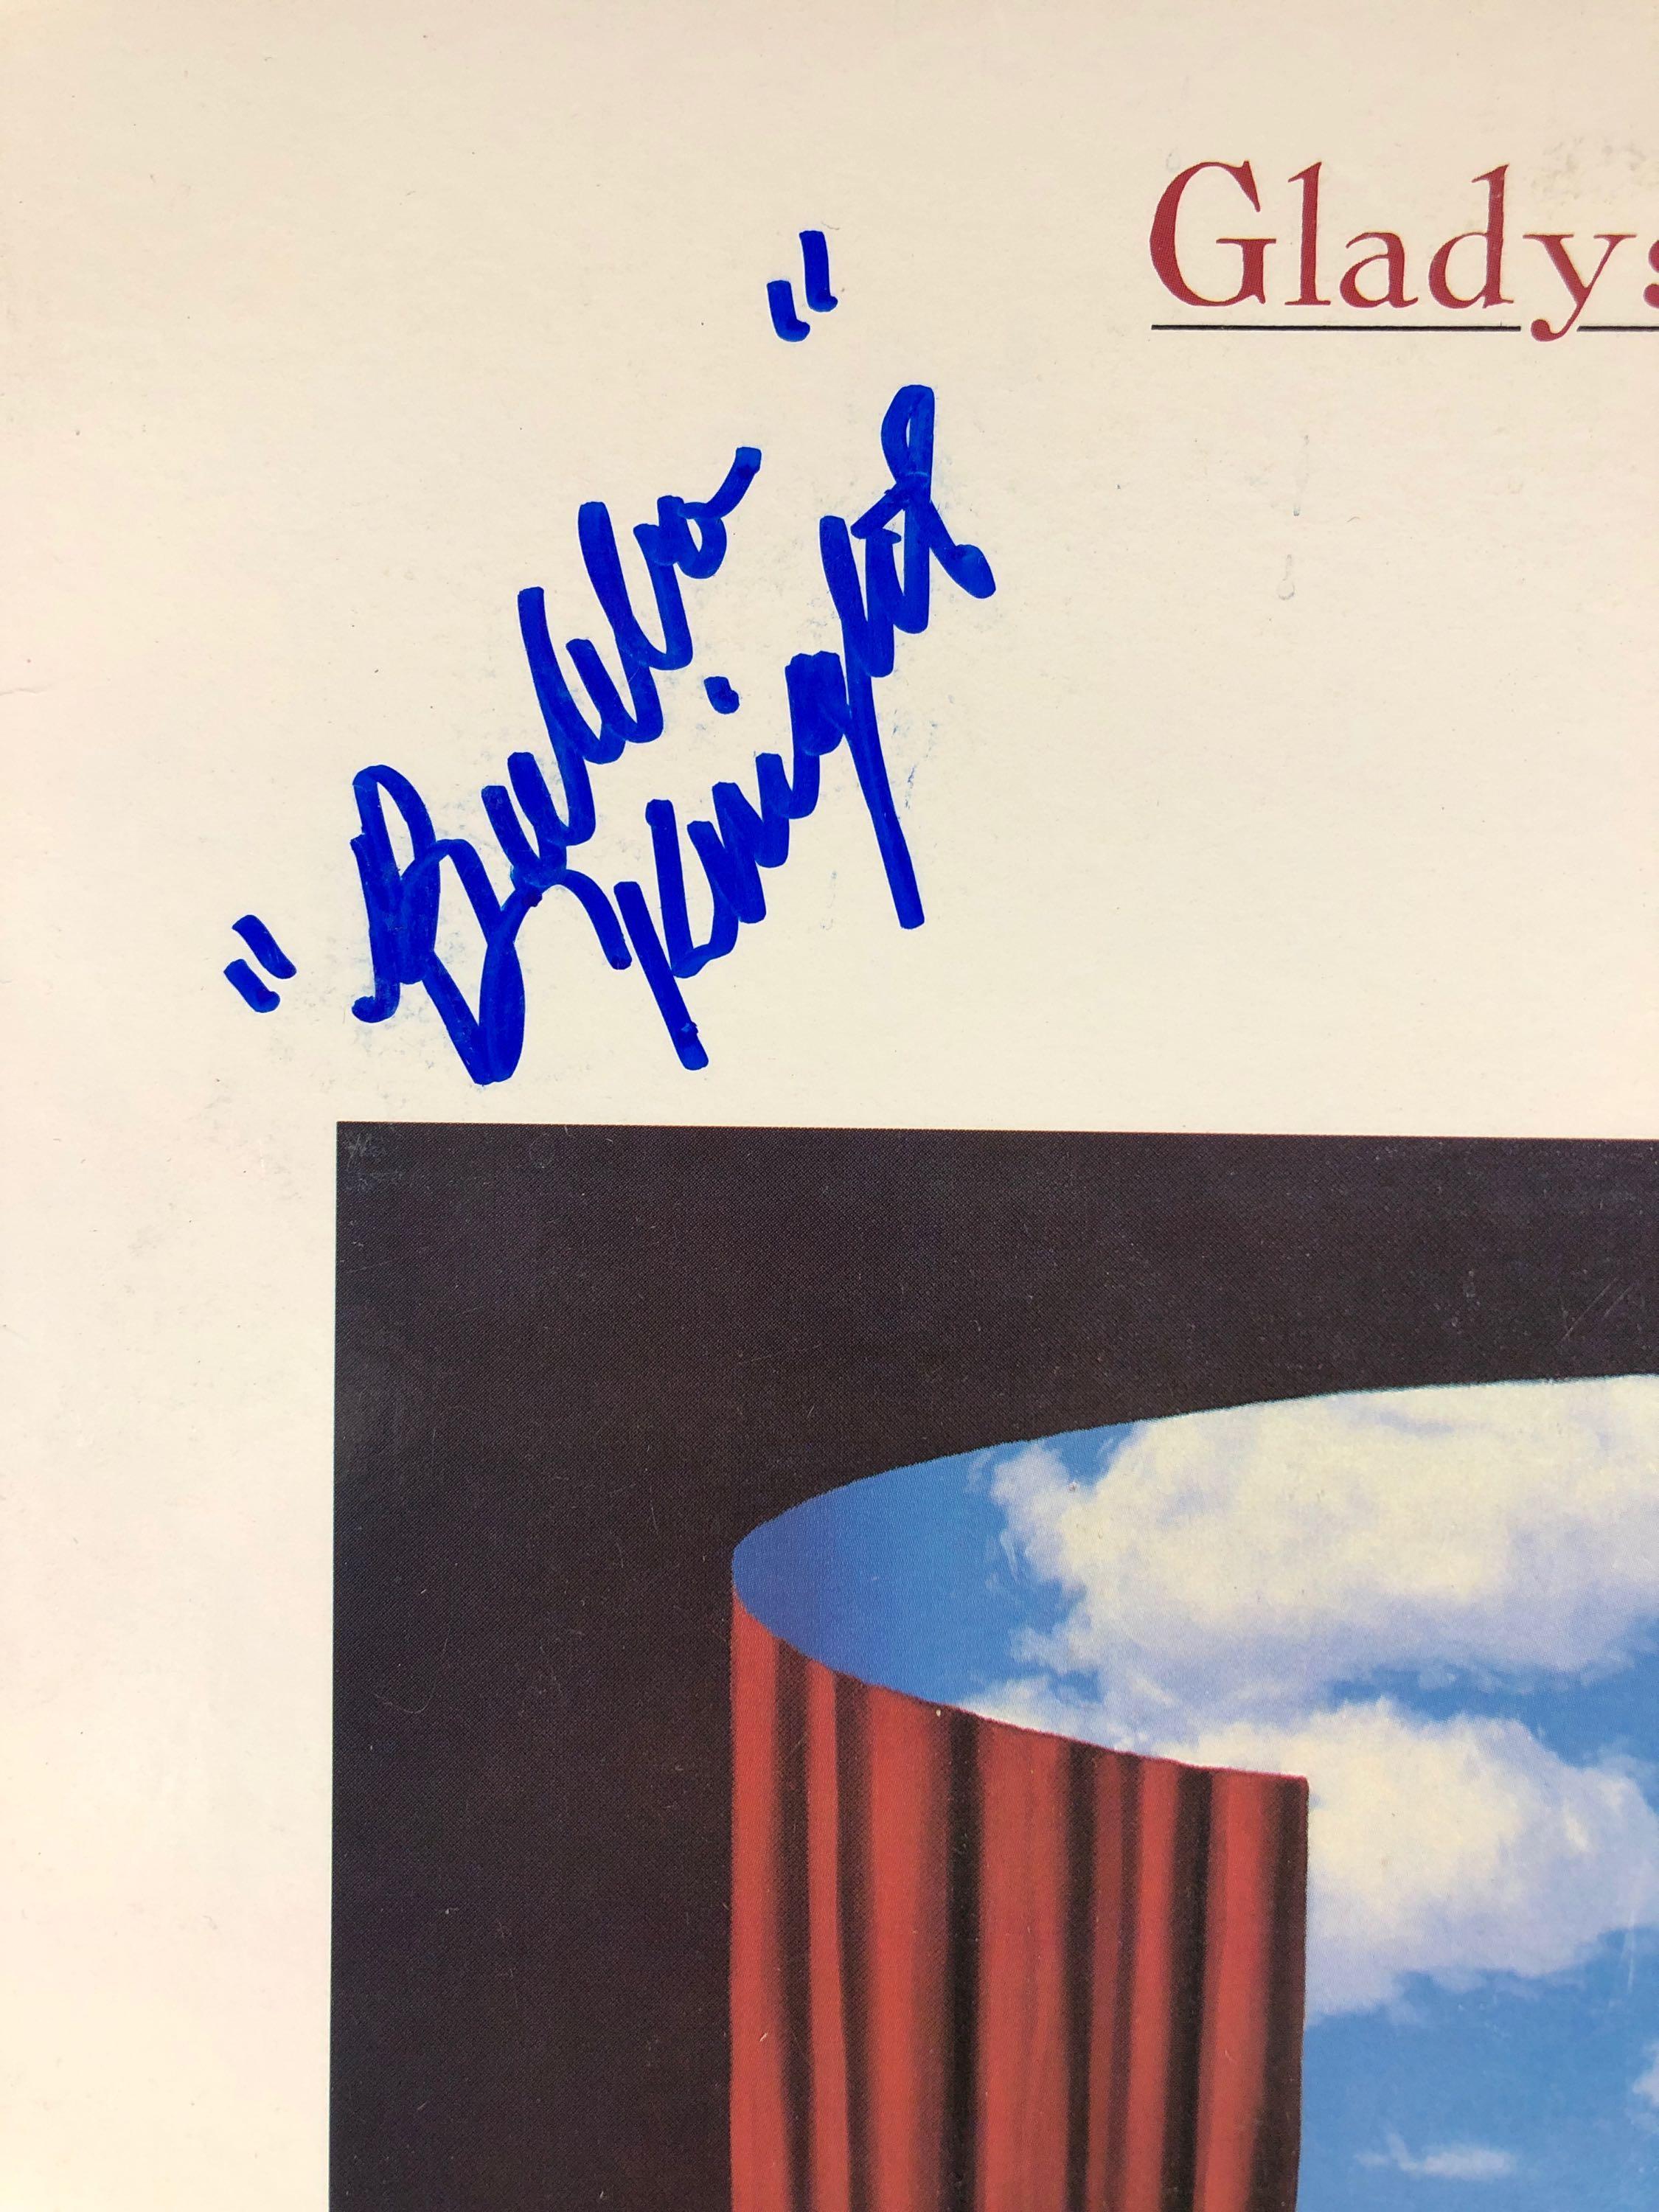 Gladys Knight and The Pips "Visions" Autographed Album by Bubba Knight